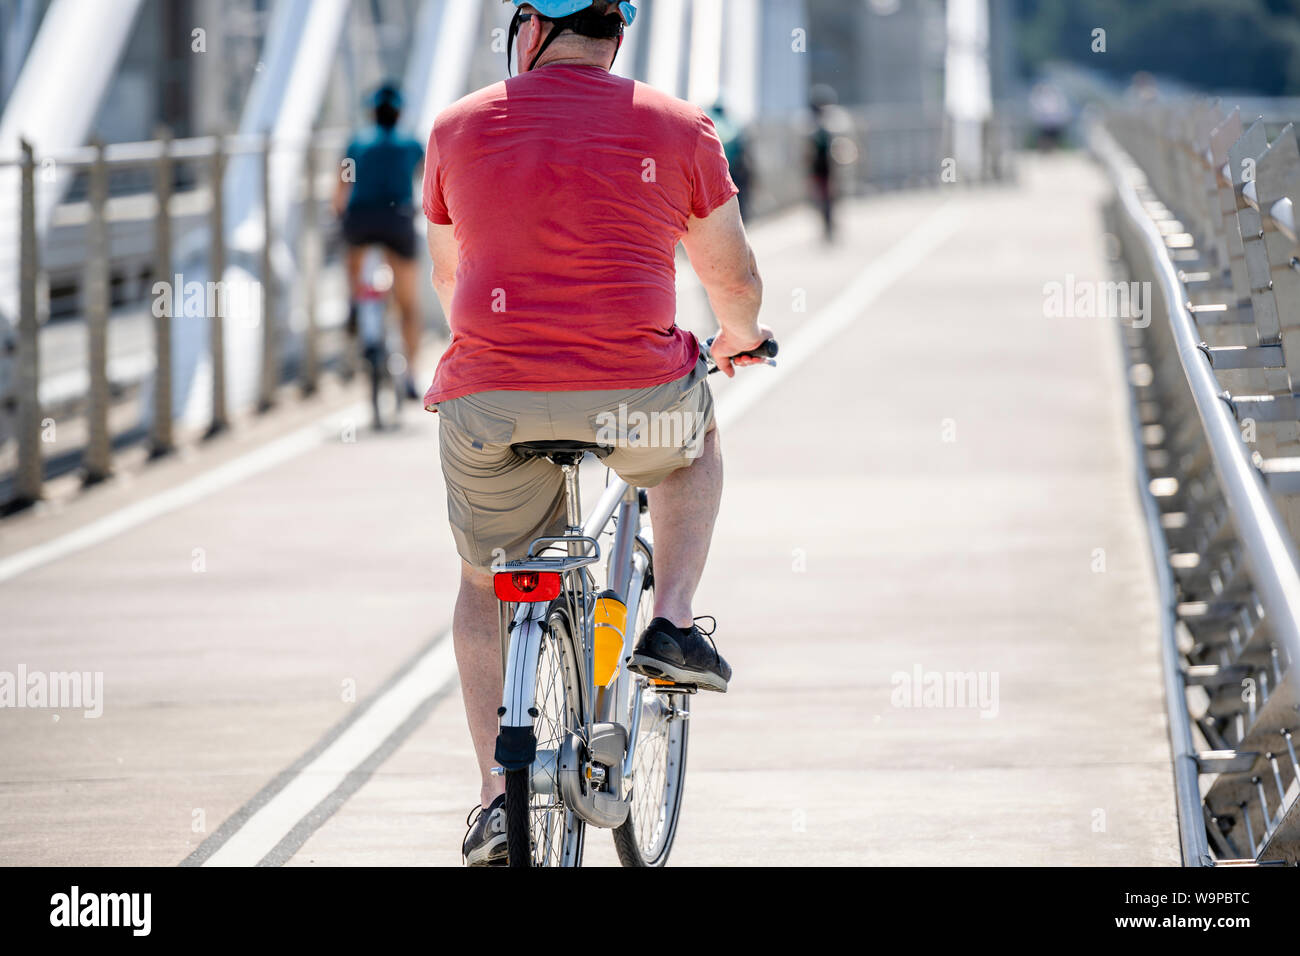 An elderly Man cyclist pedals a bicycle and rides along the Tilikum Crossing Bridge, preferring like most Portland residents an active healthy lifesty Stock Photo